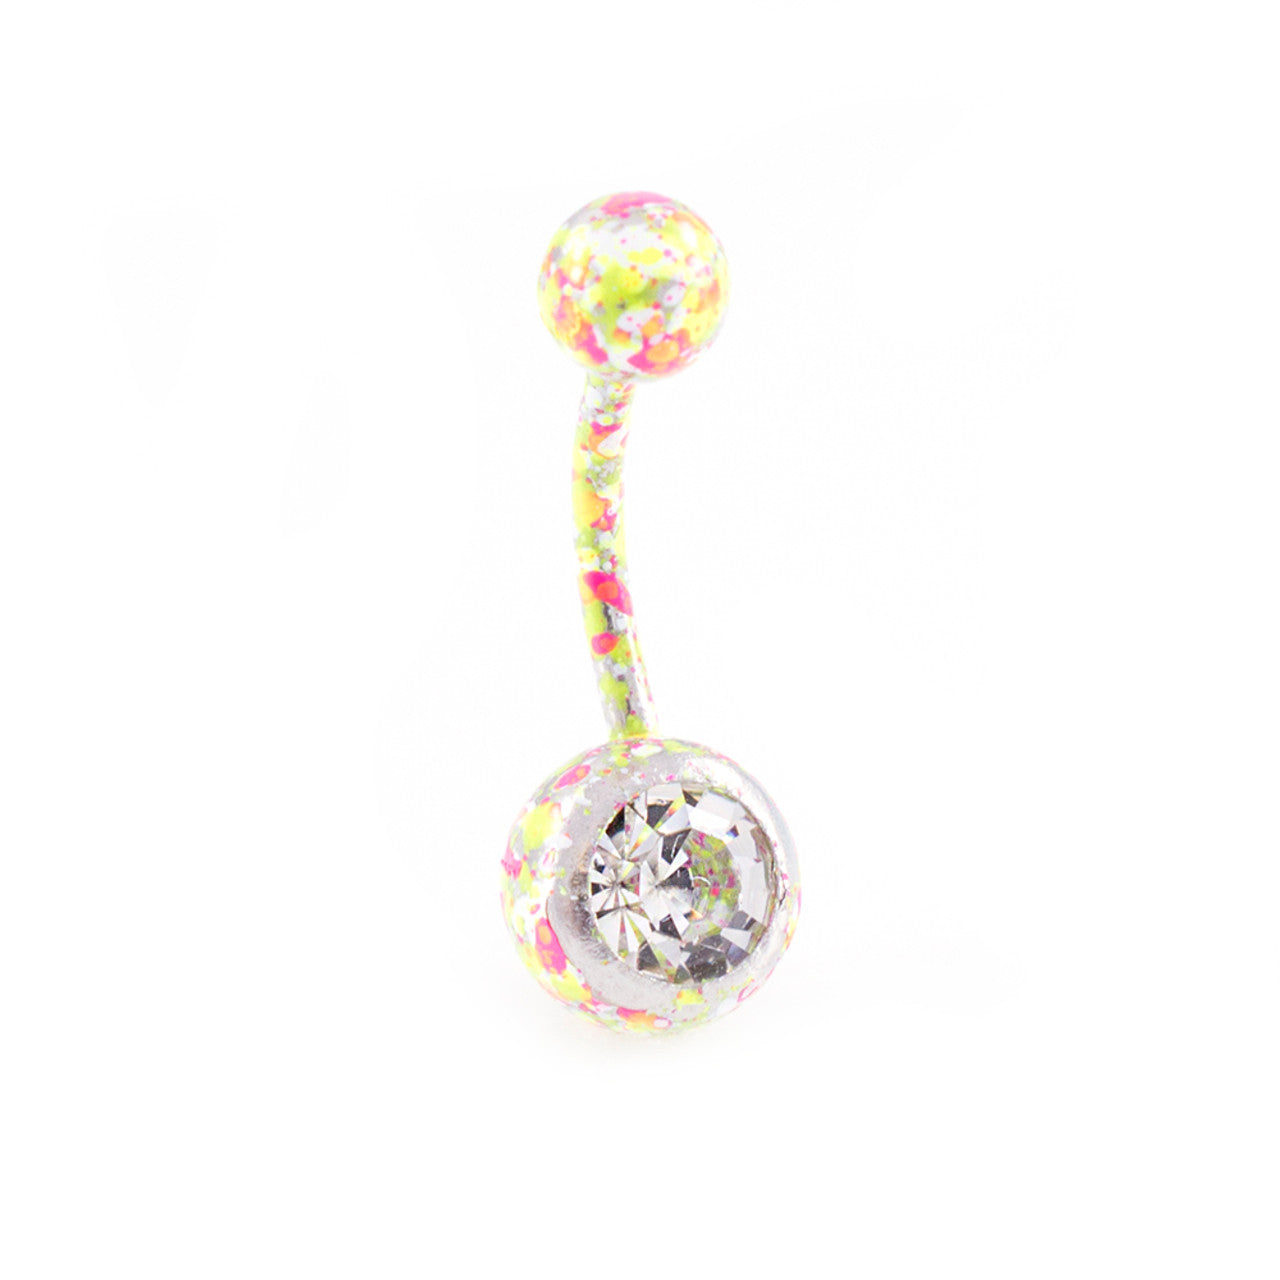 Surgical Steel Belly Button Ring 14 Gauge With Paint Splatter - 4 Pack